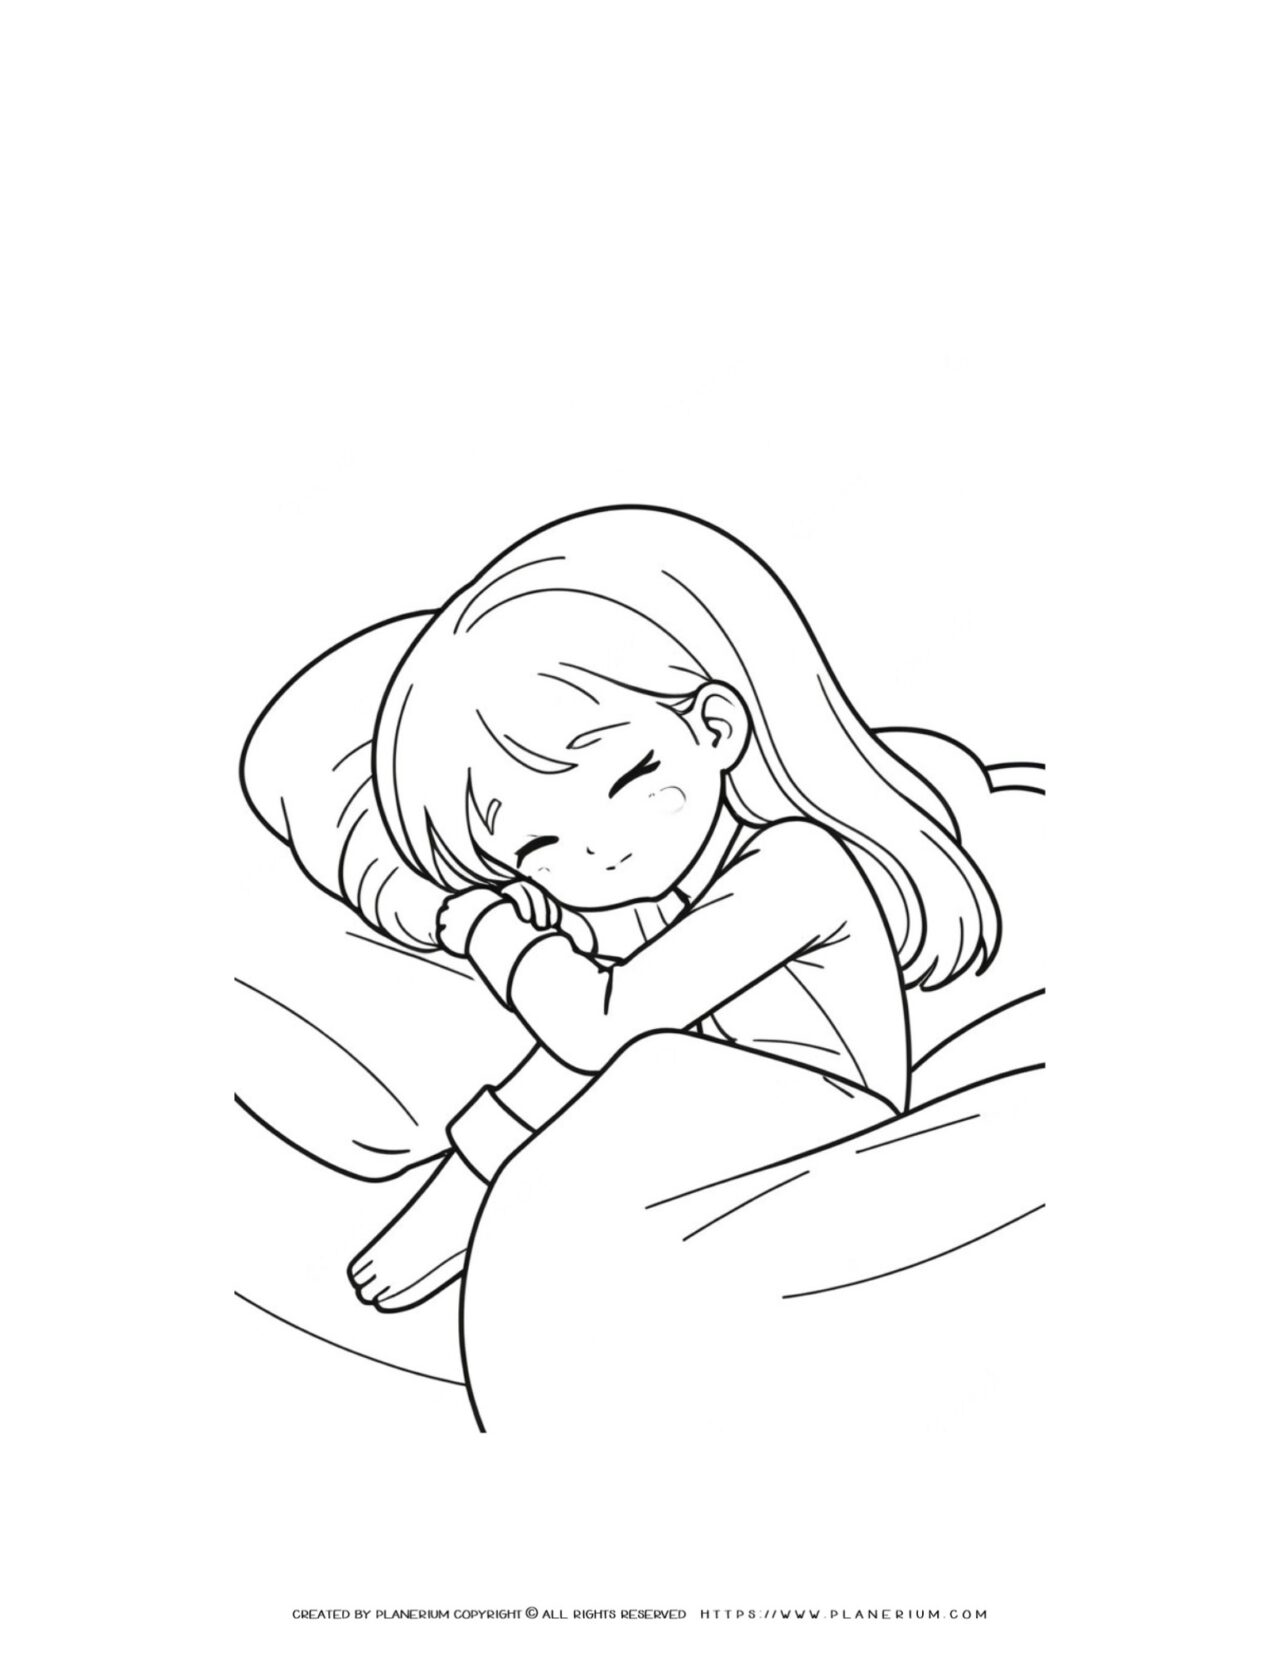 girl-with-long-hair-sleeping-in-bed-coloring-page